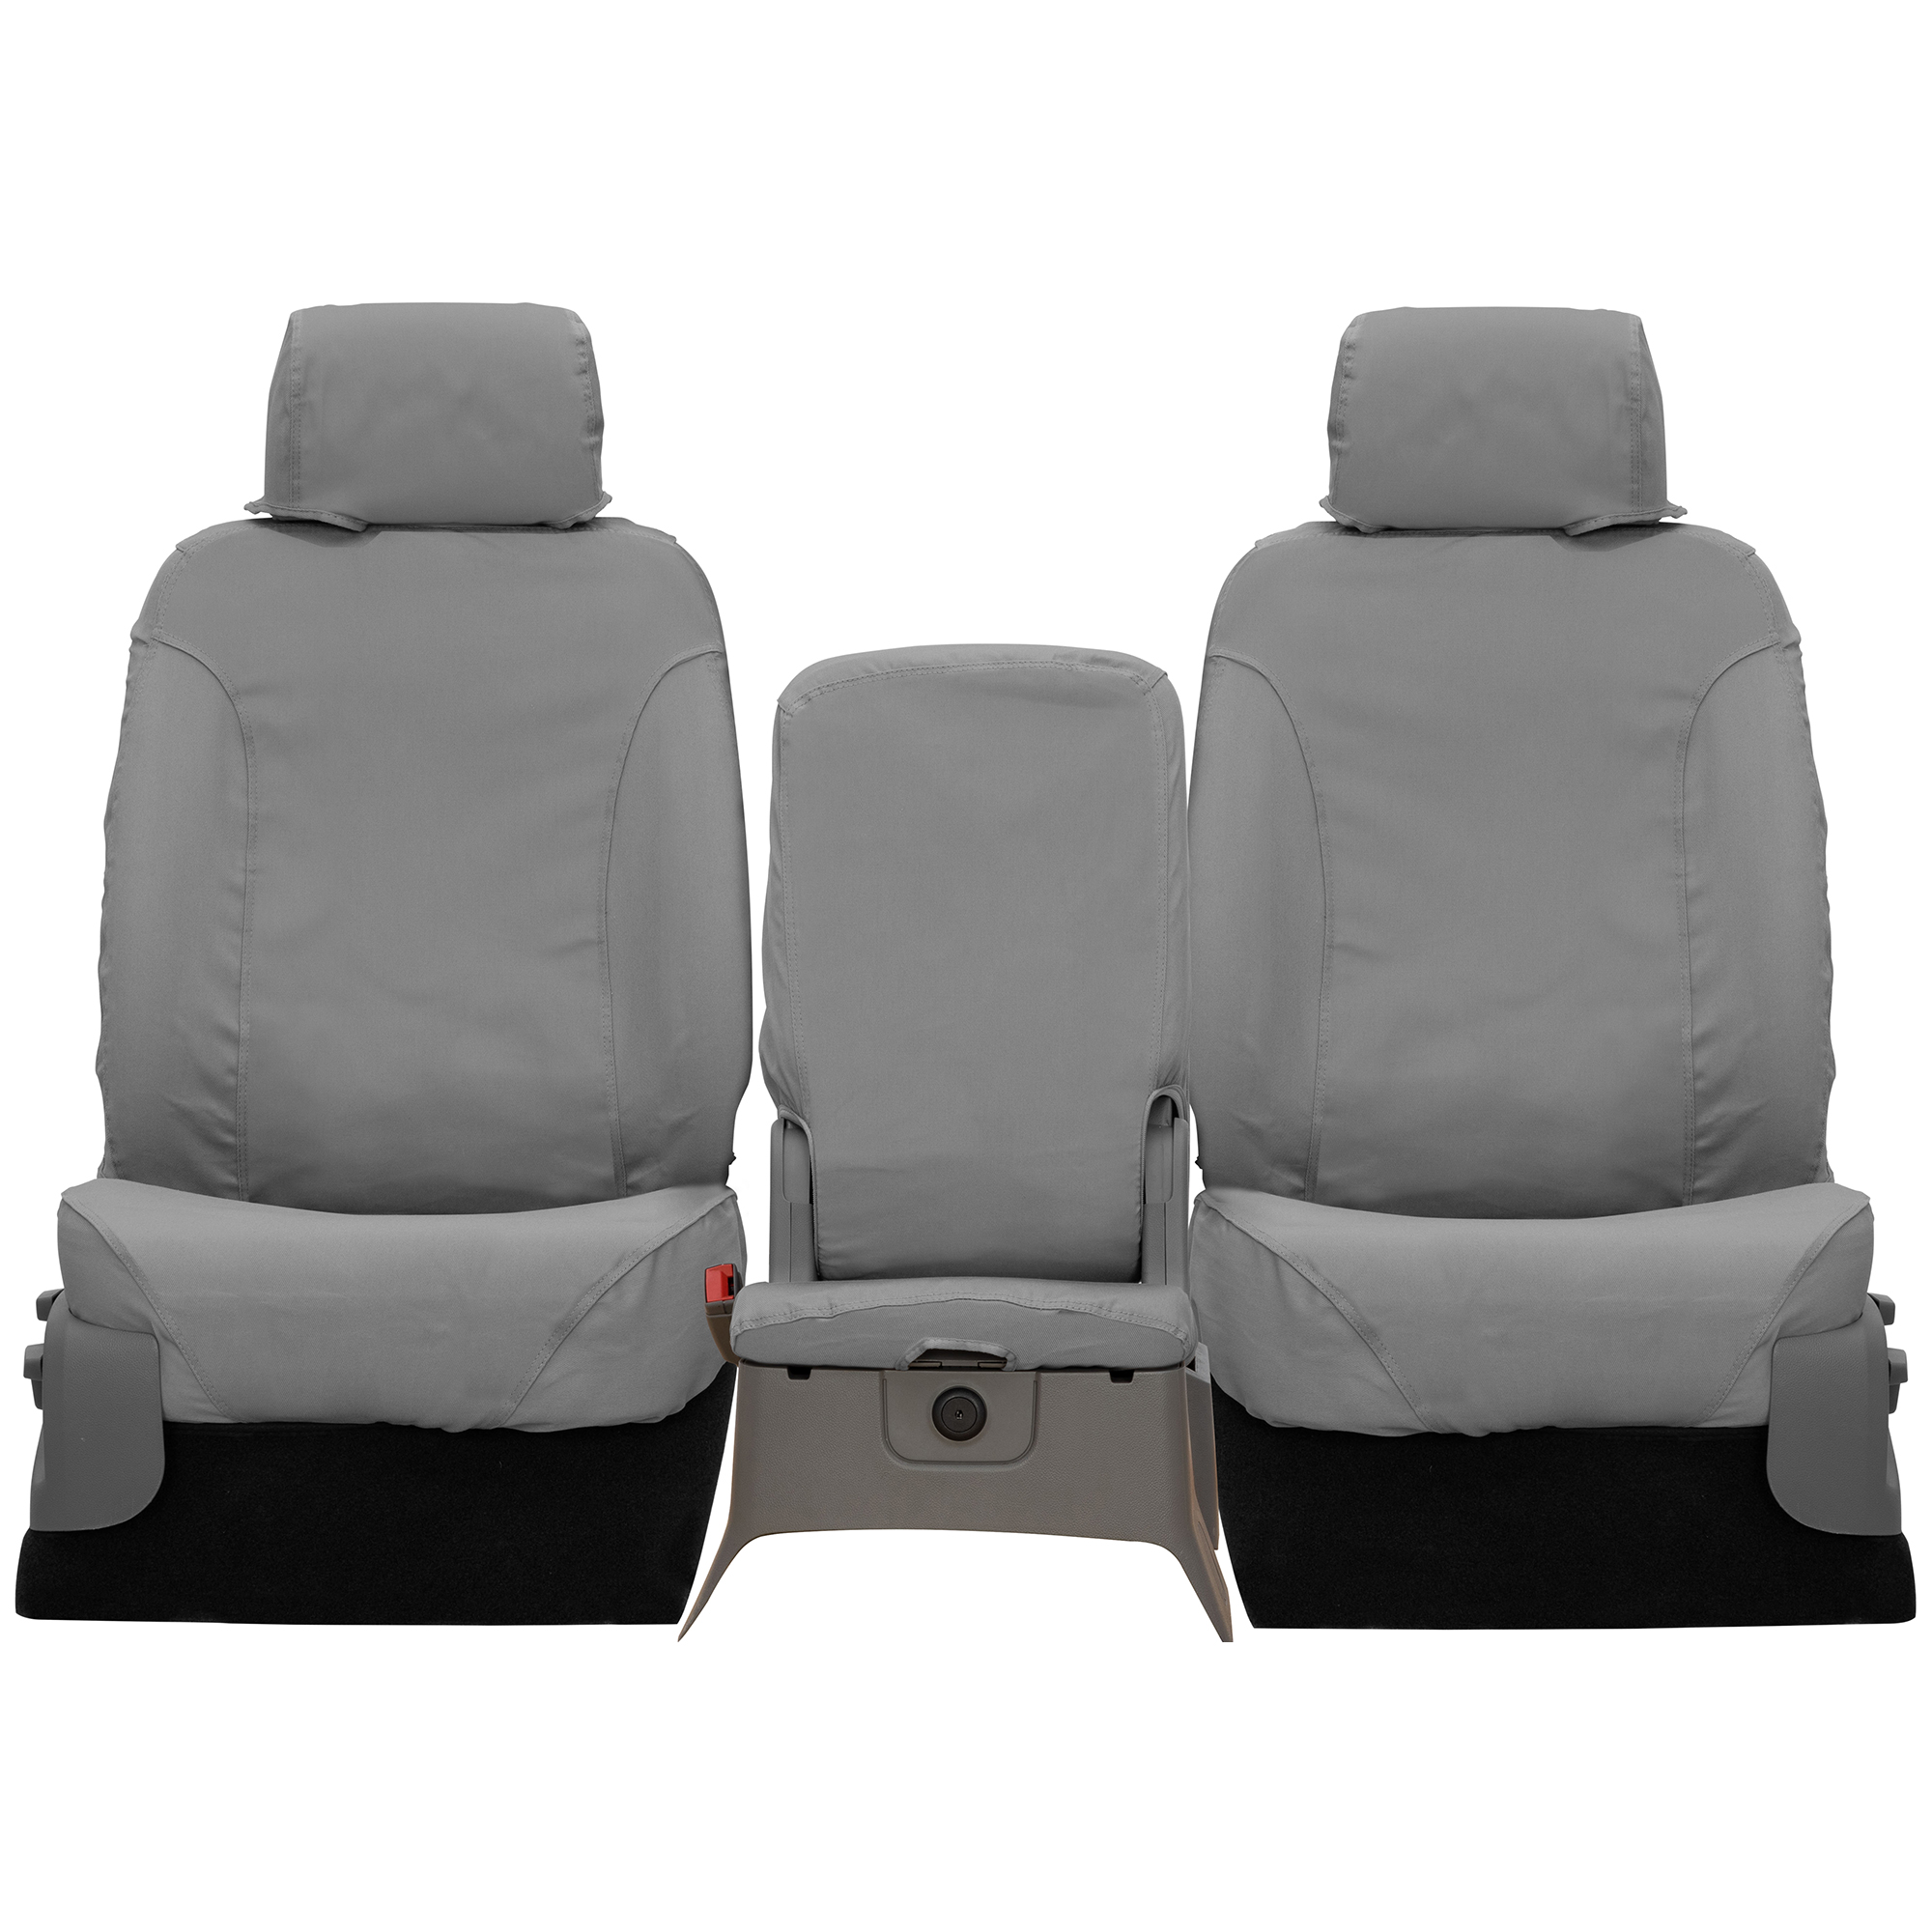 Covercraft SeatSaver Front Row Custom Fit Seat Cover for Select Ram Pickup Models - Polycotton (Grey) - image 3 of 7